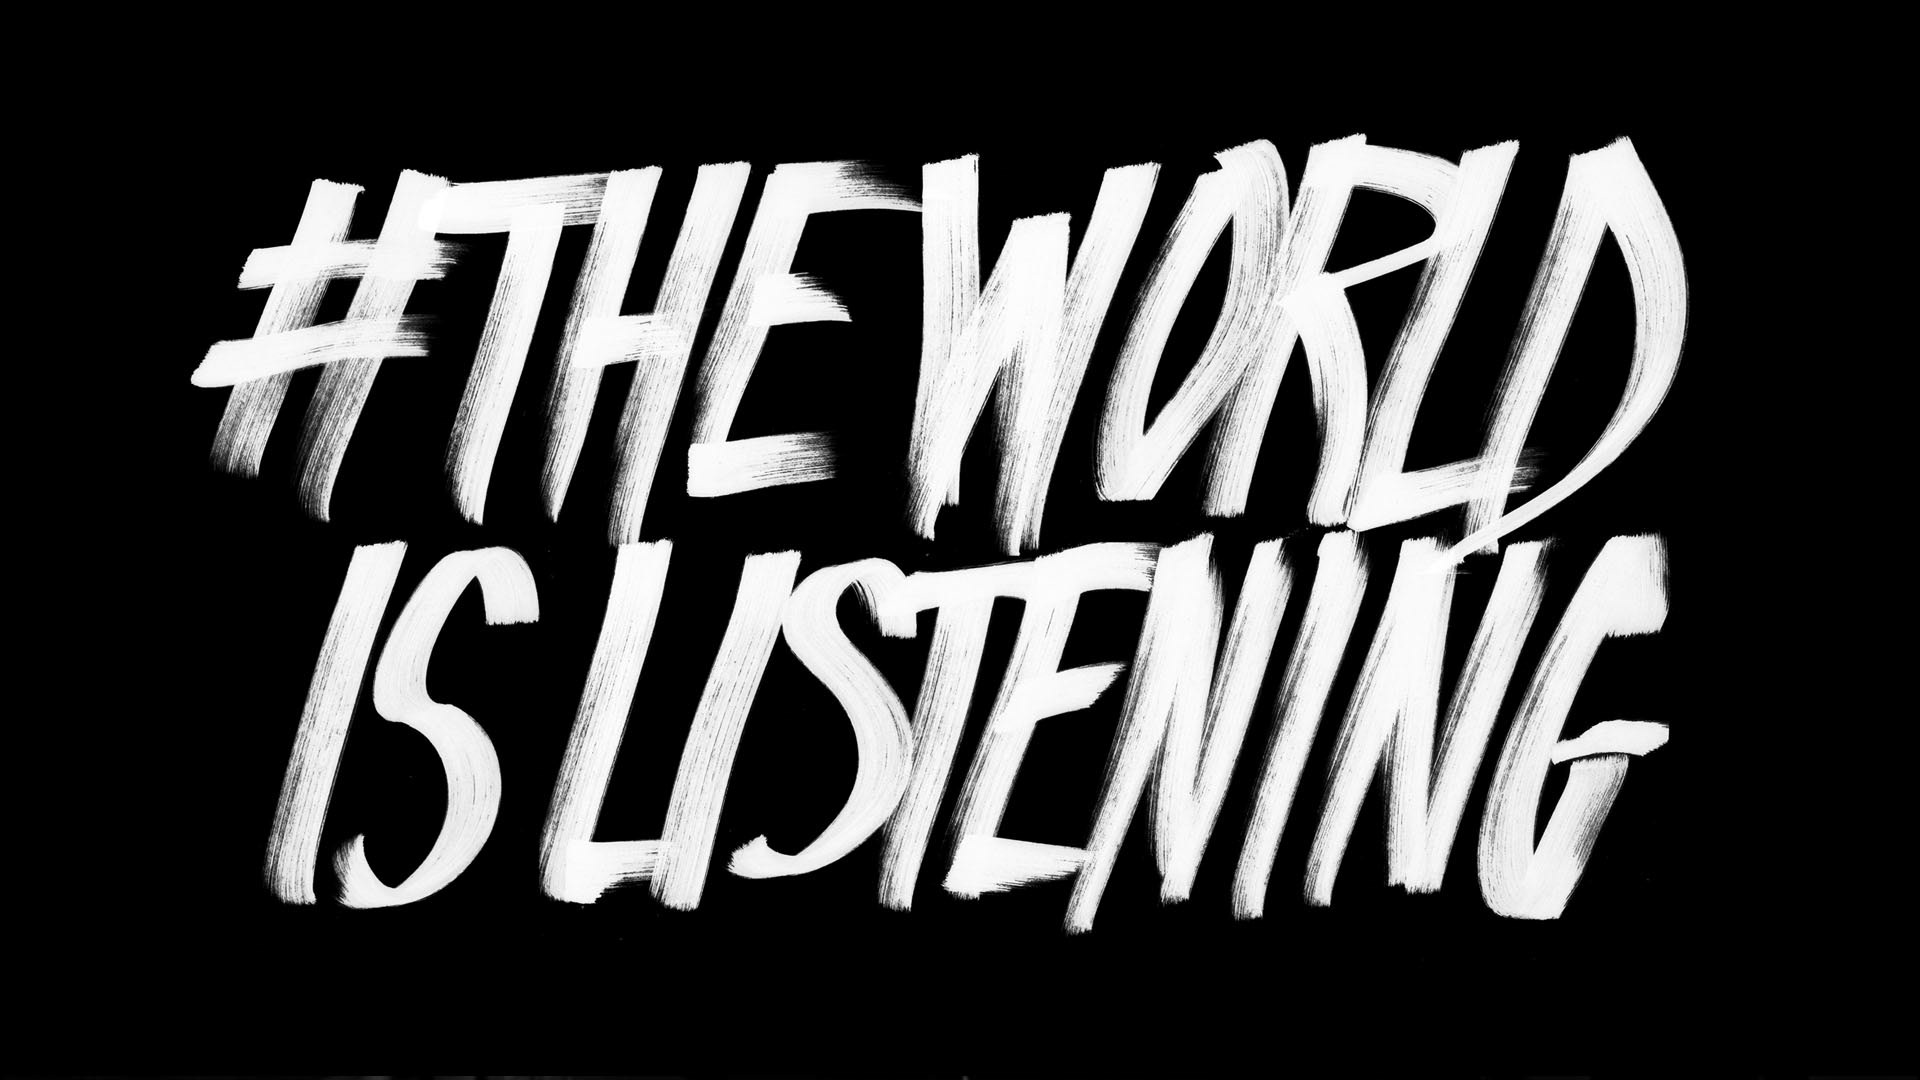 Black background with bold, white, handwritten text reading "#THEWORLD IS LISTENING". The letters are slightly uneven, giving a dynamic, urgent feel to the message. .